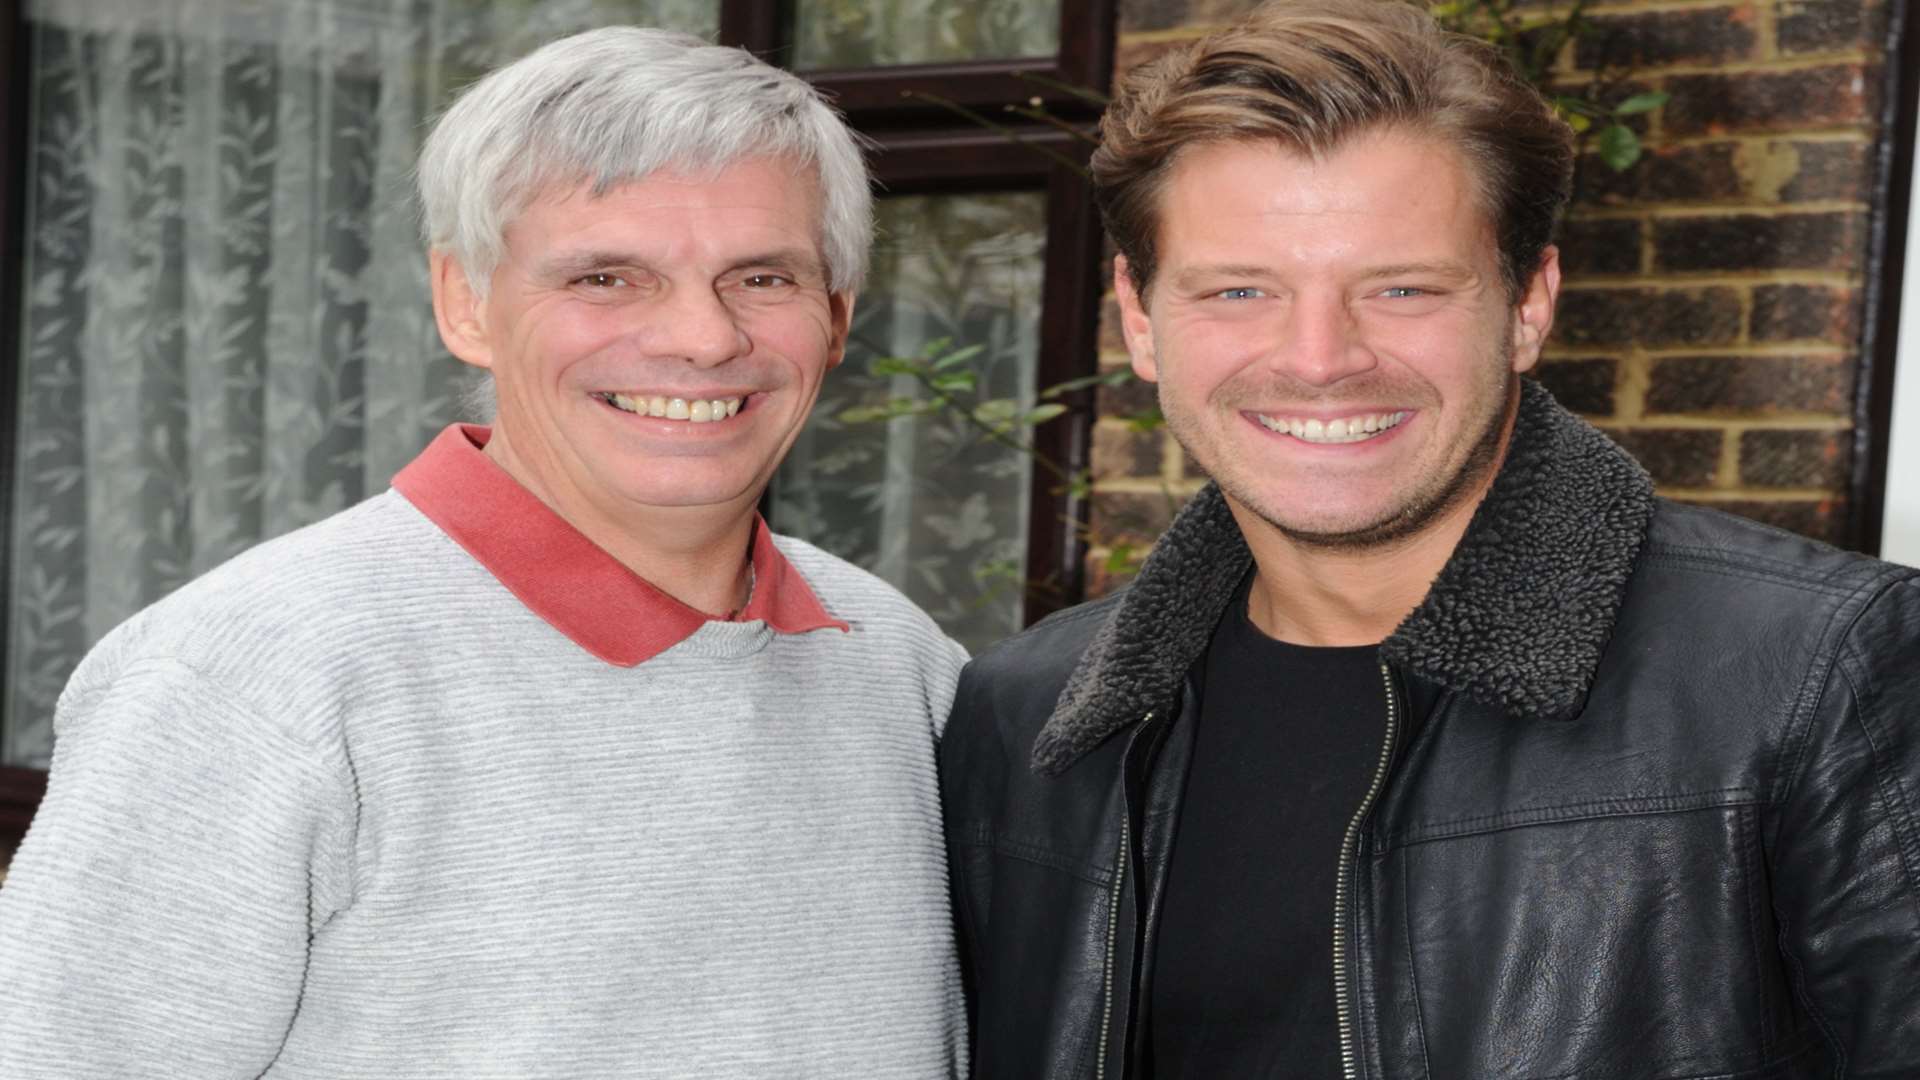 Trevor Foster was reunited with the stranger who saved his life when he collapsed in Maidstone